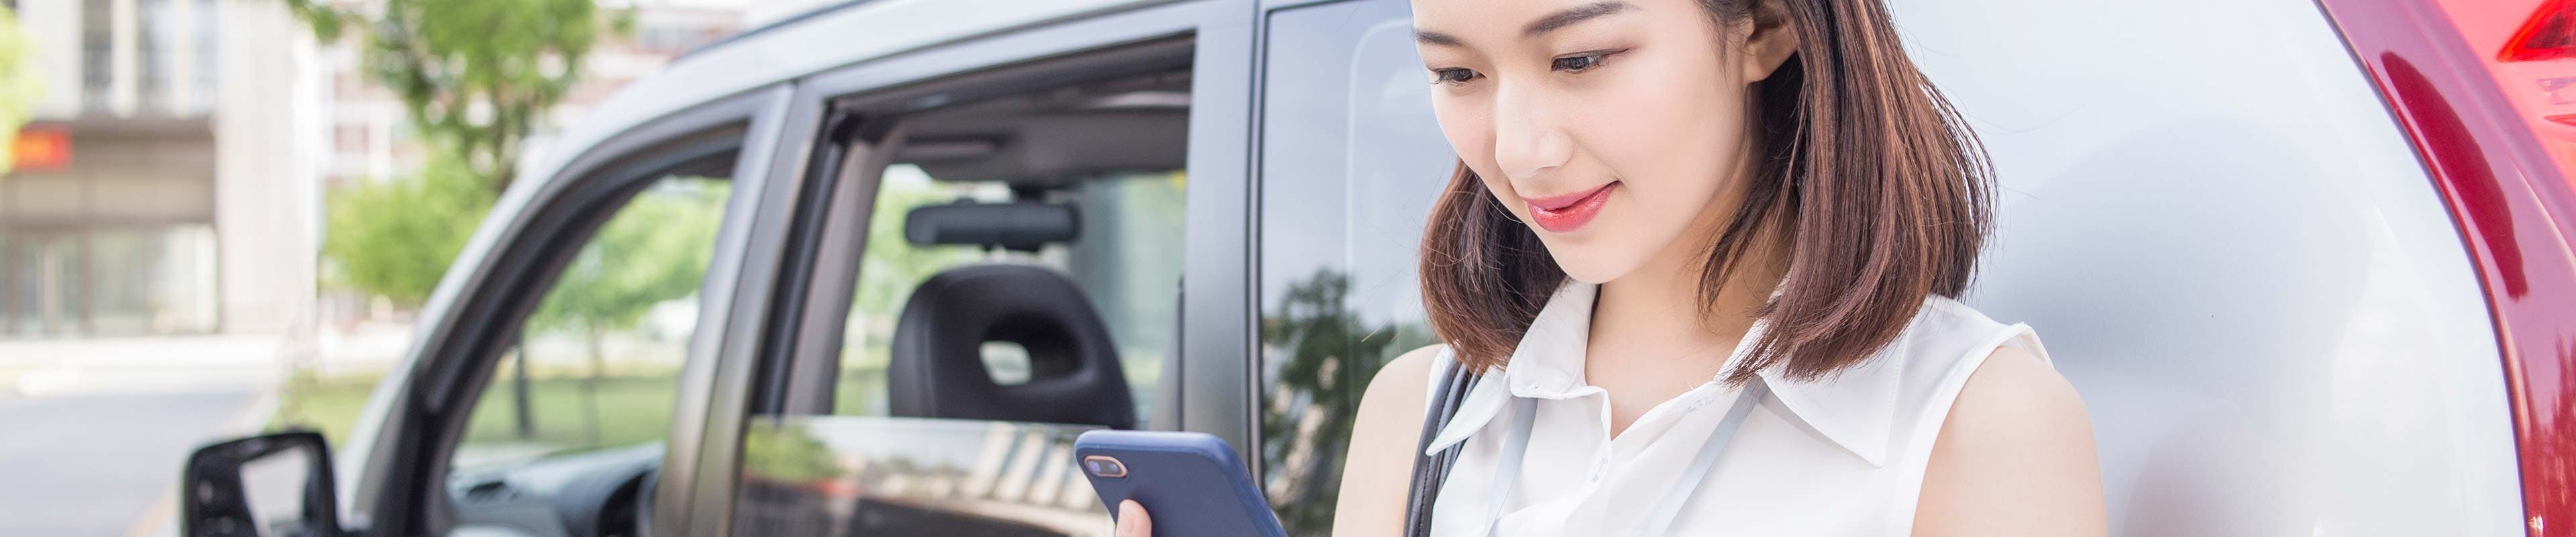 Driver Looking at her phone leaning against her car Web